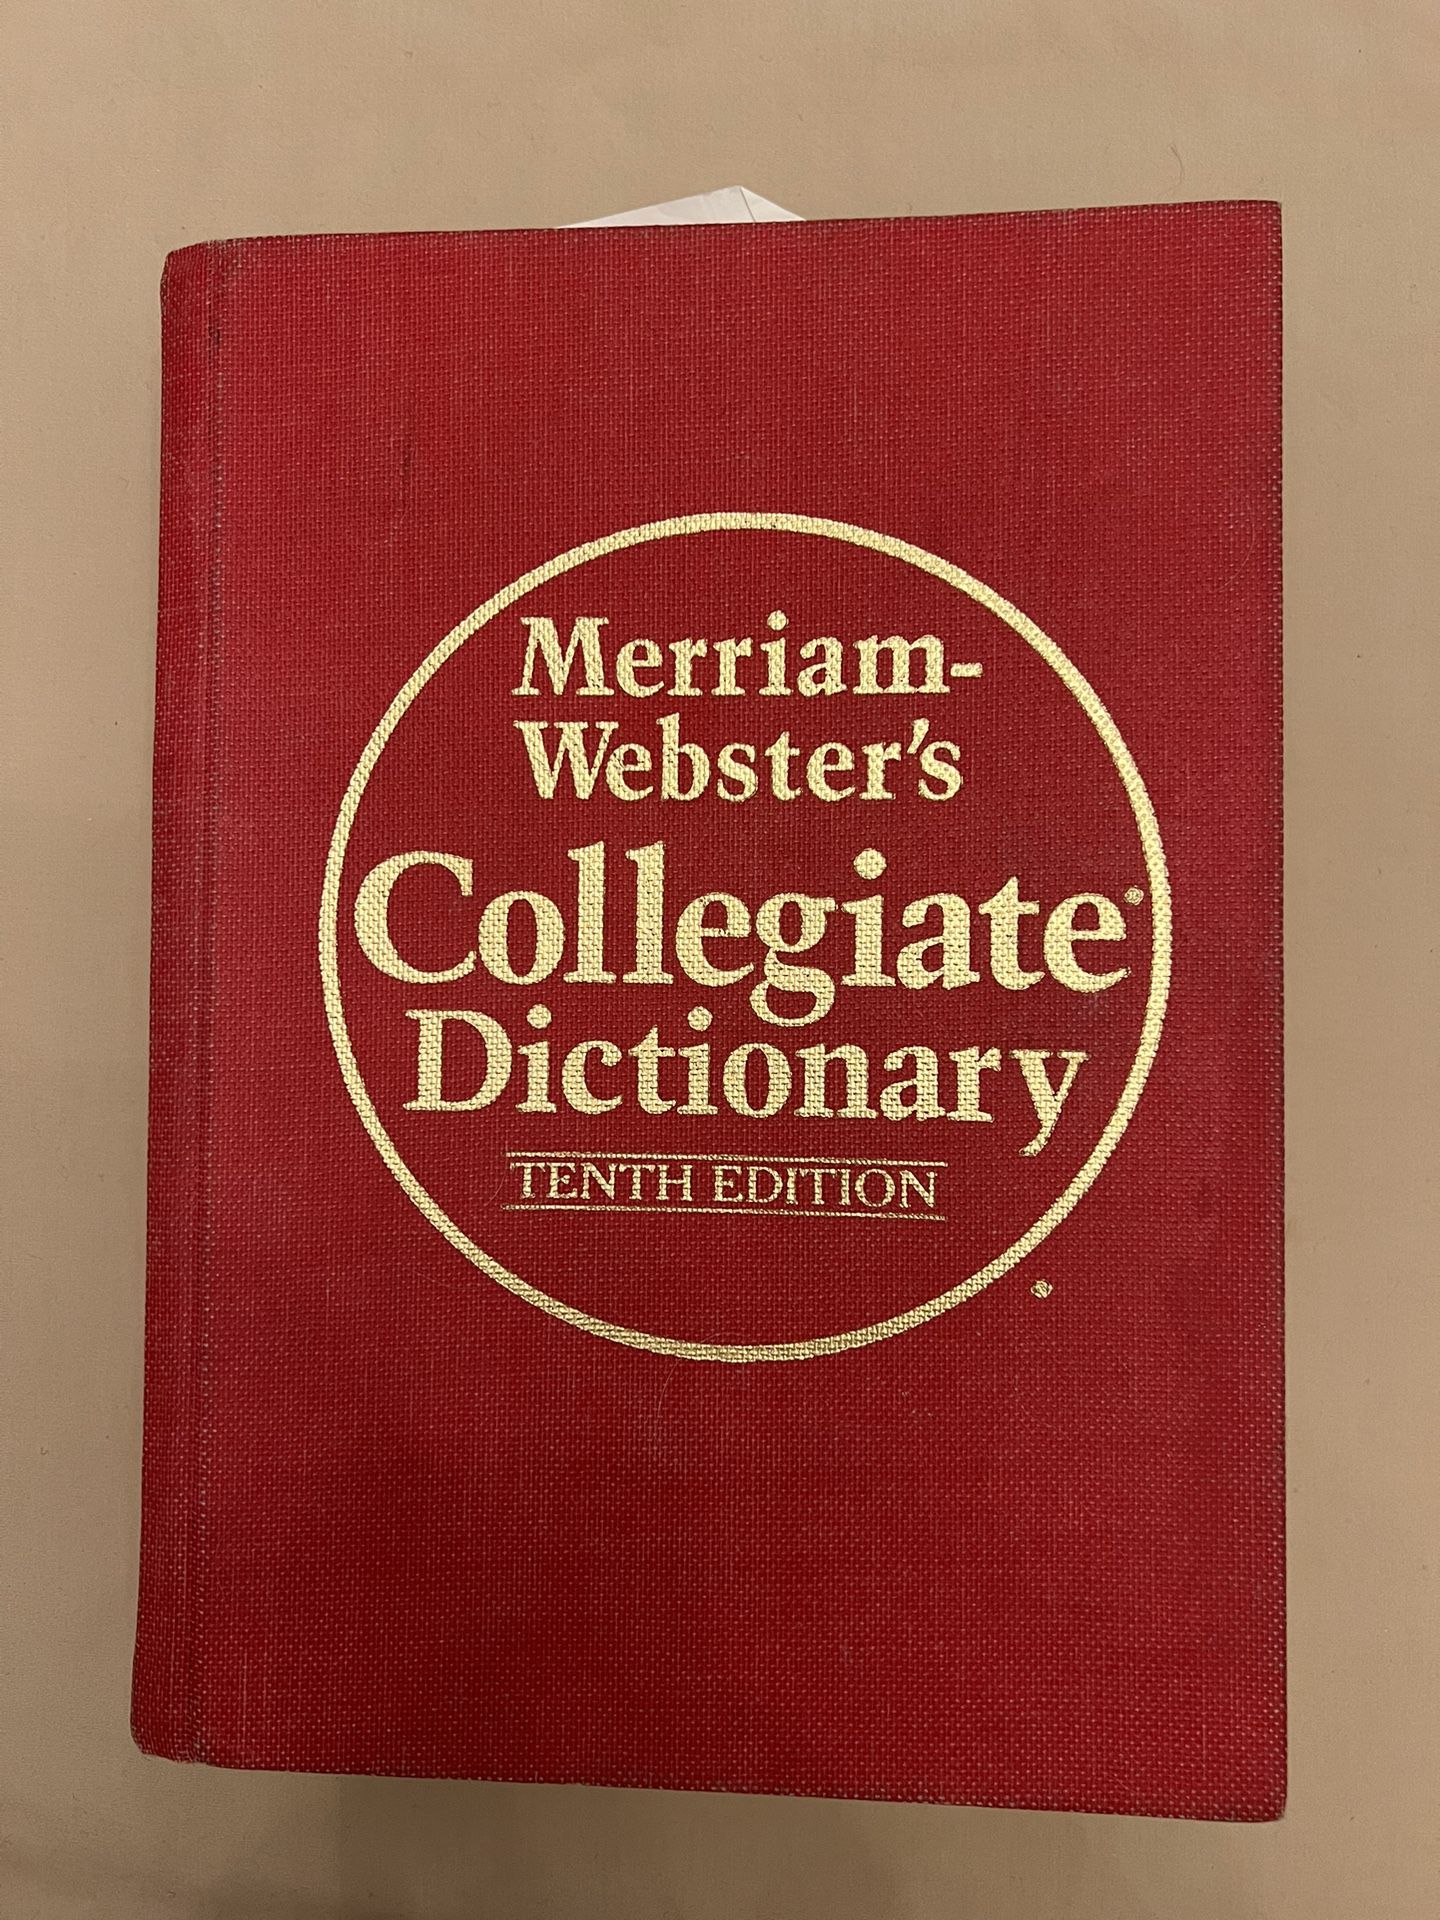 Merriam-Webster’s Collegiate Dictionary Tenth Edition